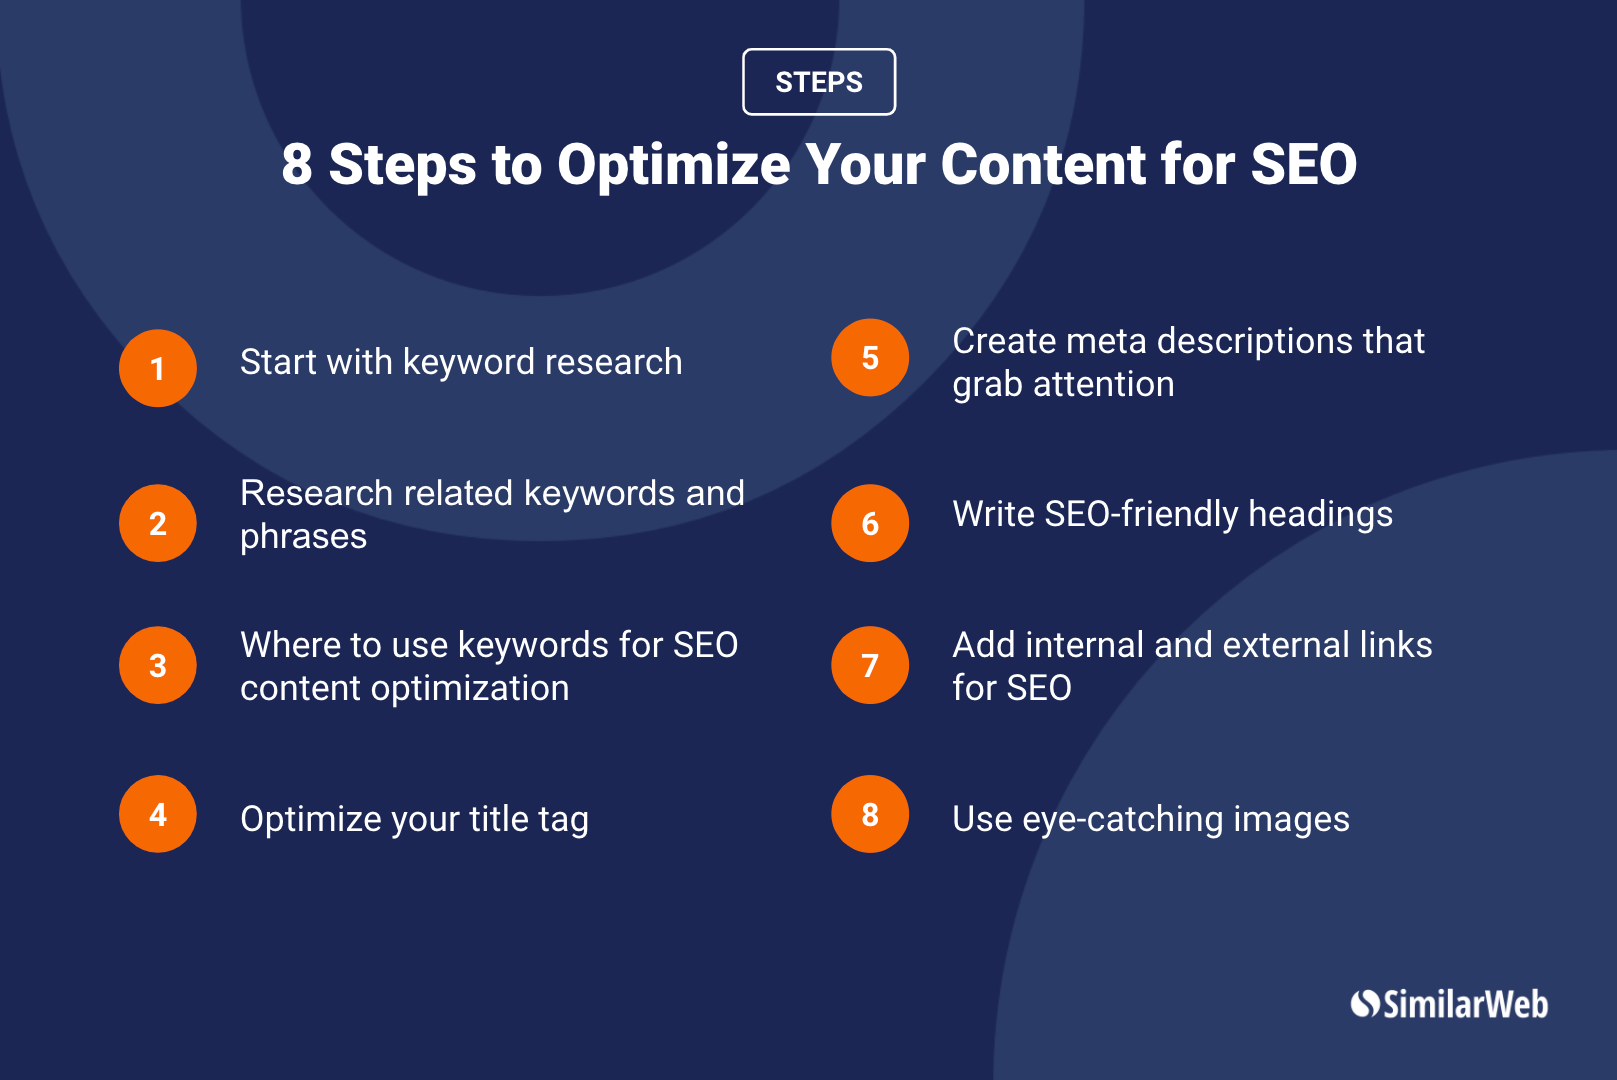 Steps to Optimize your content for SEO